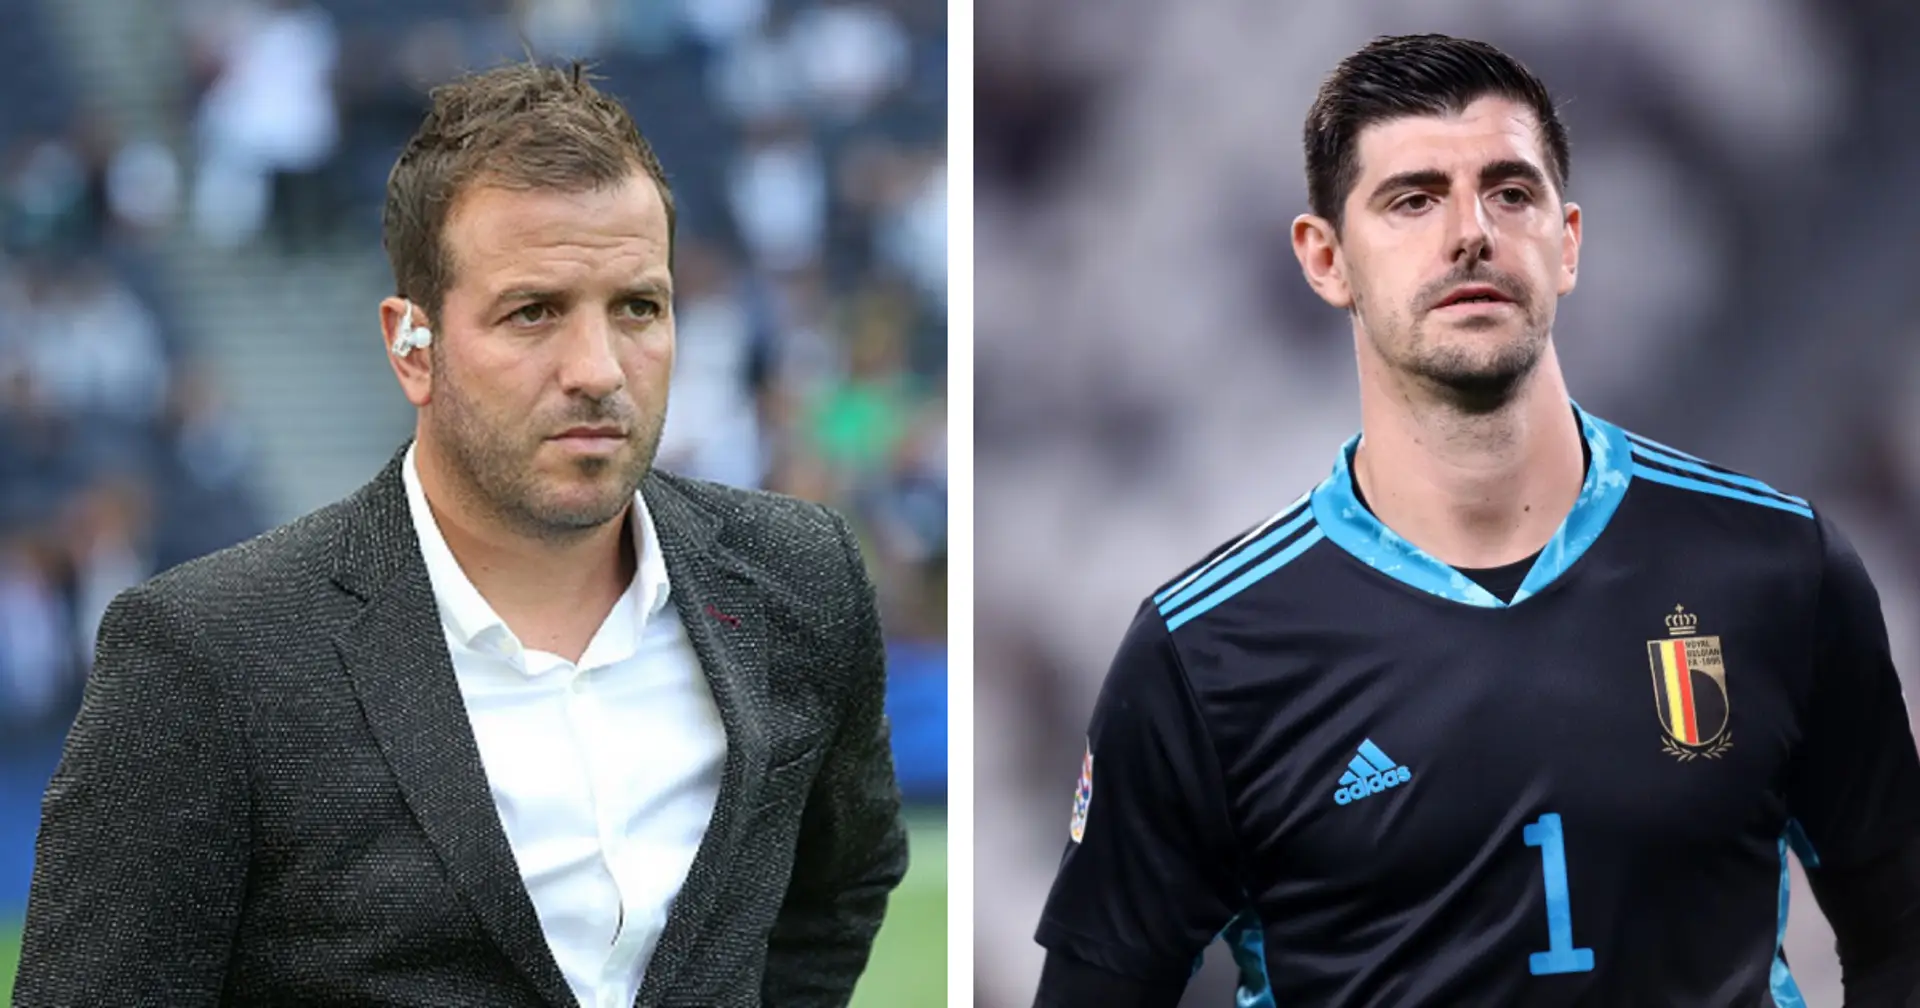 'They are whining': Van der Vaart slams Courtois after football calendar criticism